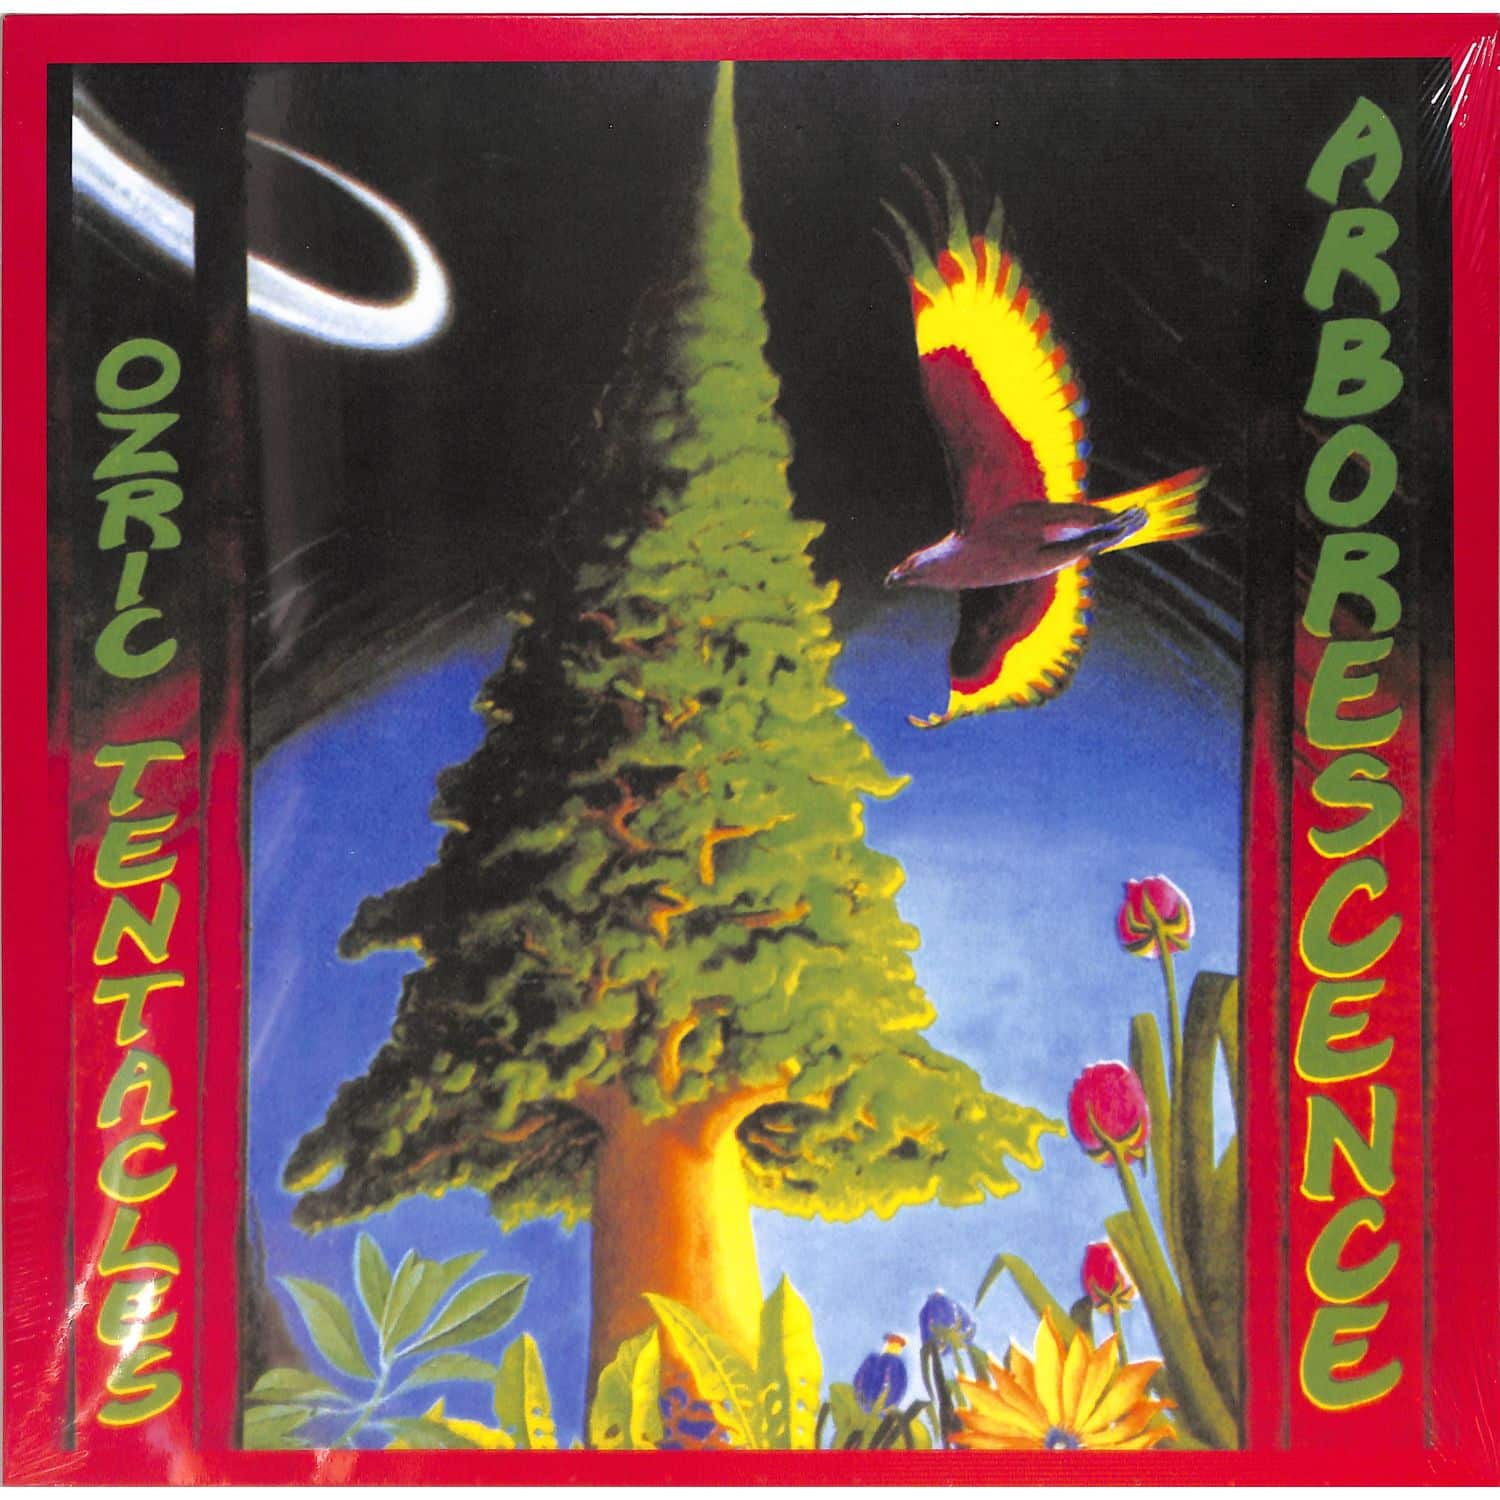 Ozric Tentacles - ARBORESCENCE 